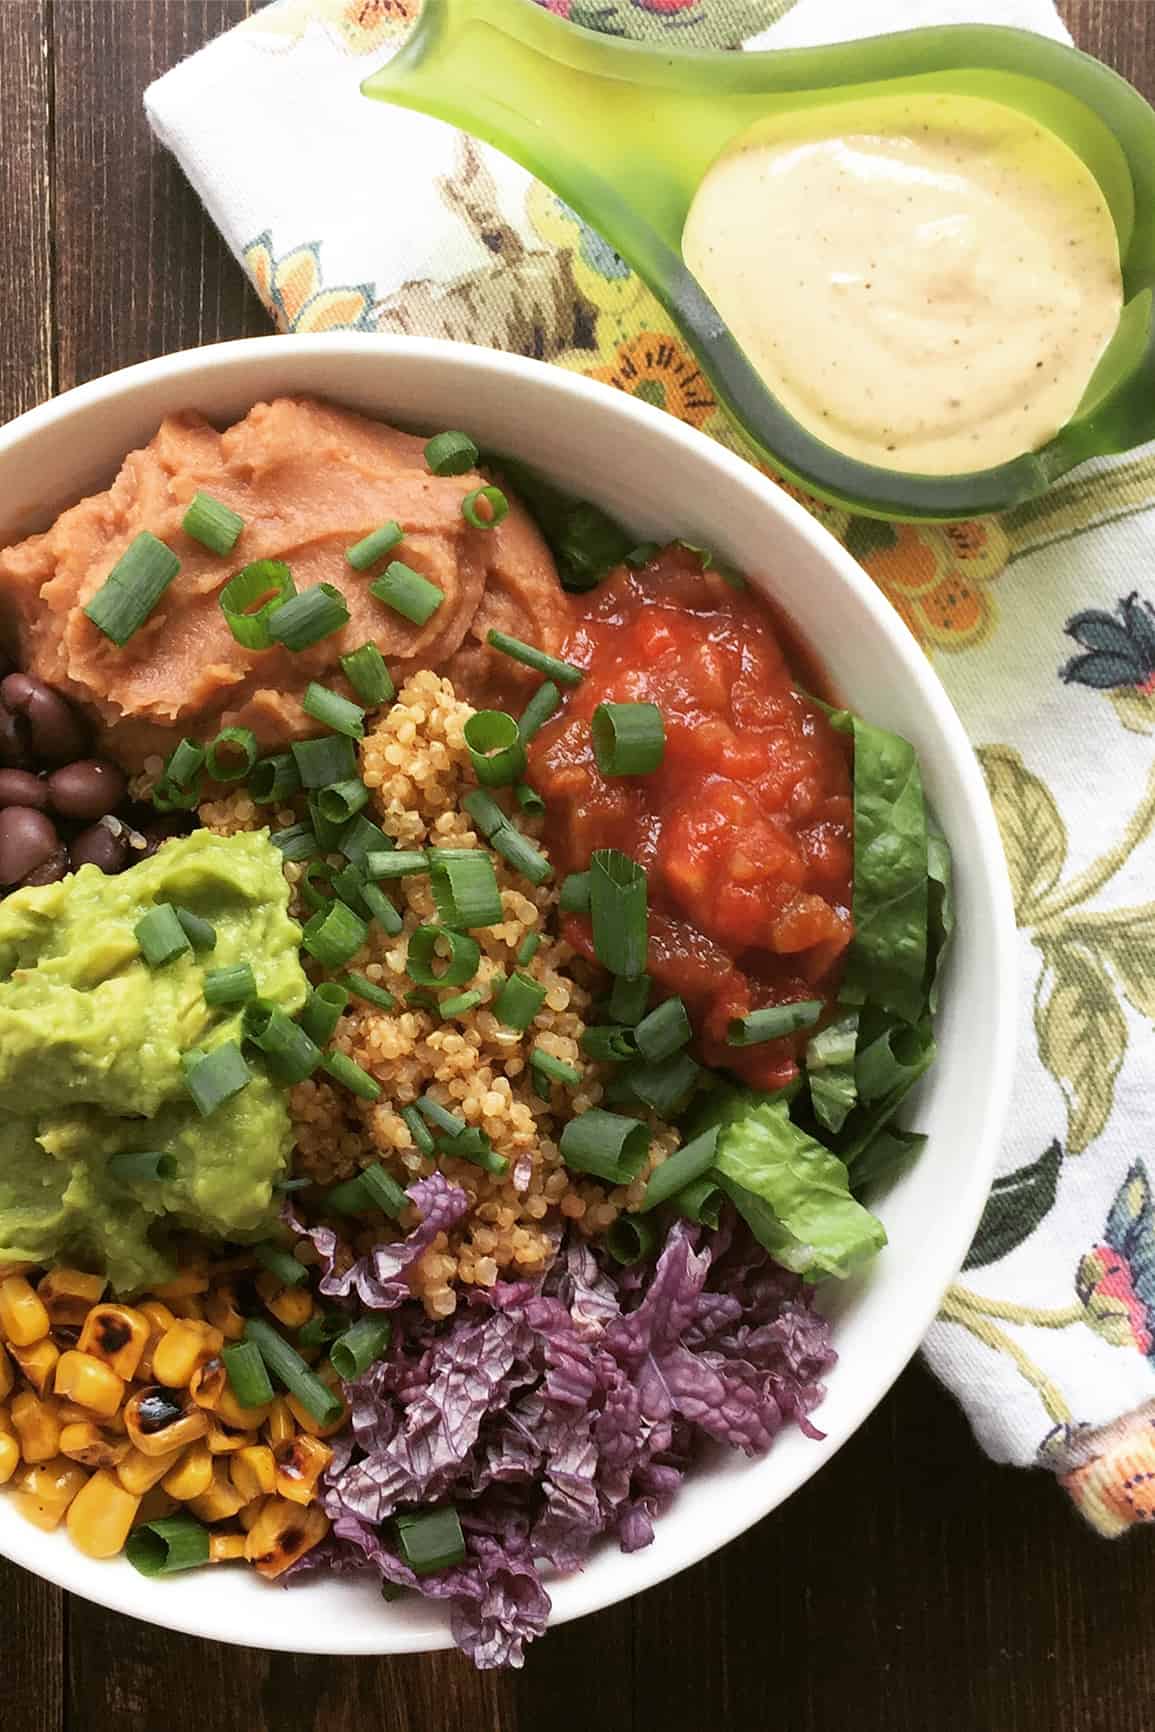 White bowl with roasted corn, avocado mash, black beans, lettuce strips, chopped purple onion, quinoa and red and orange sauces.